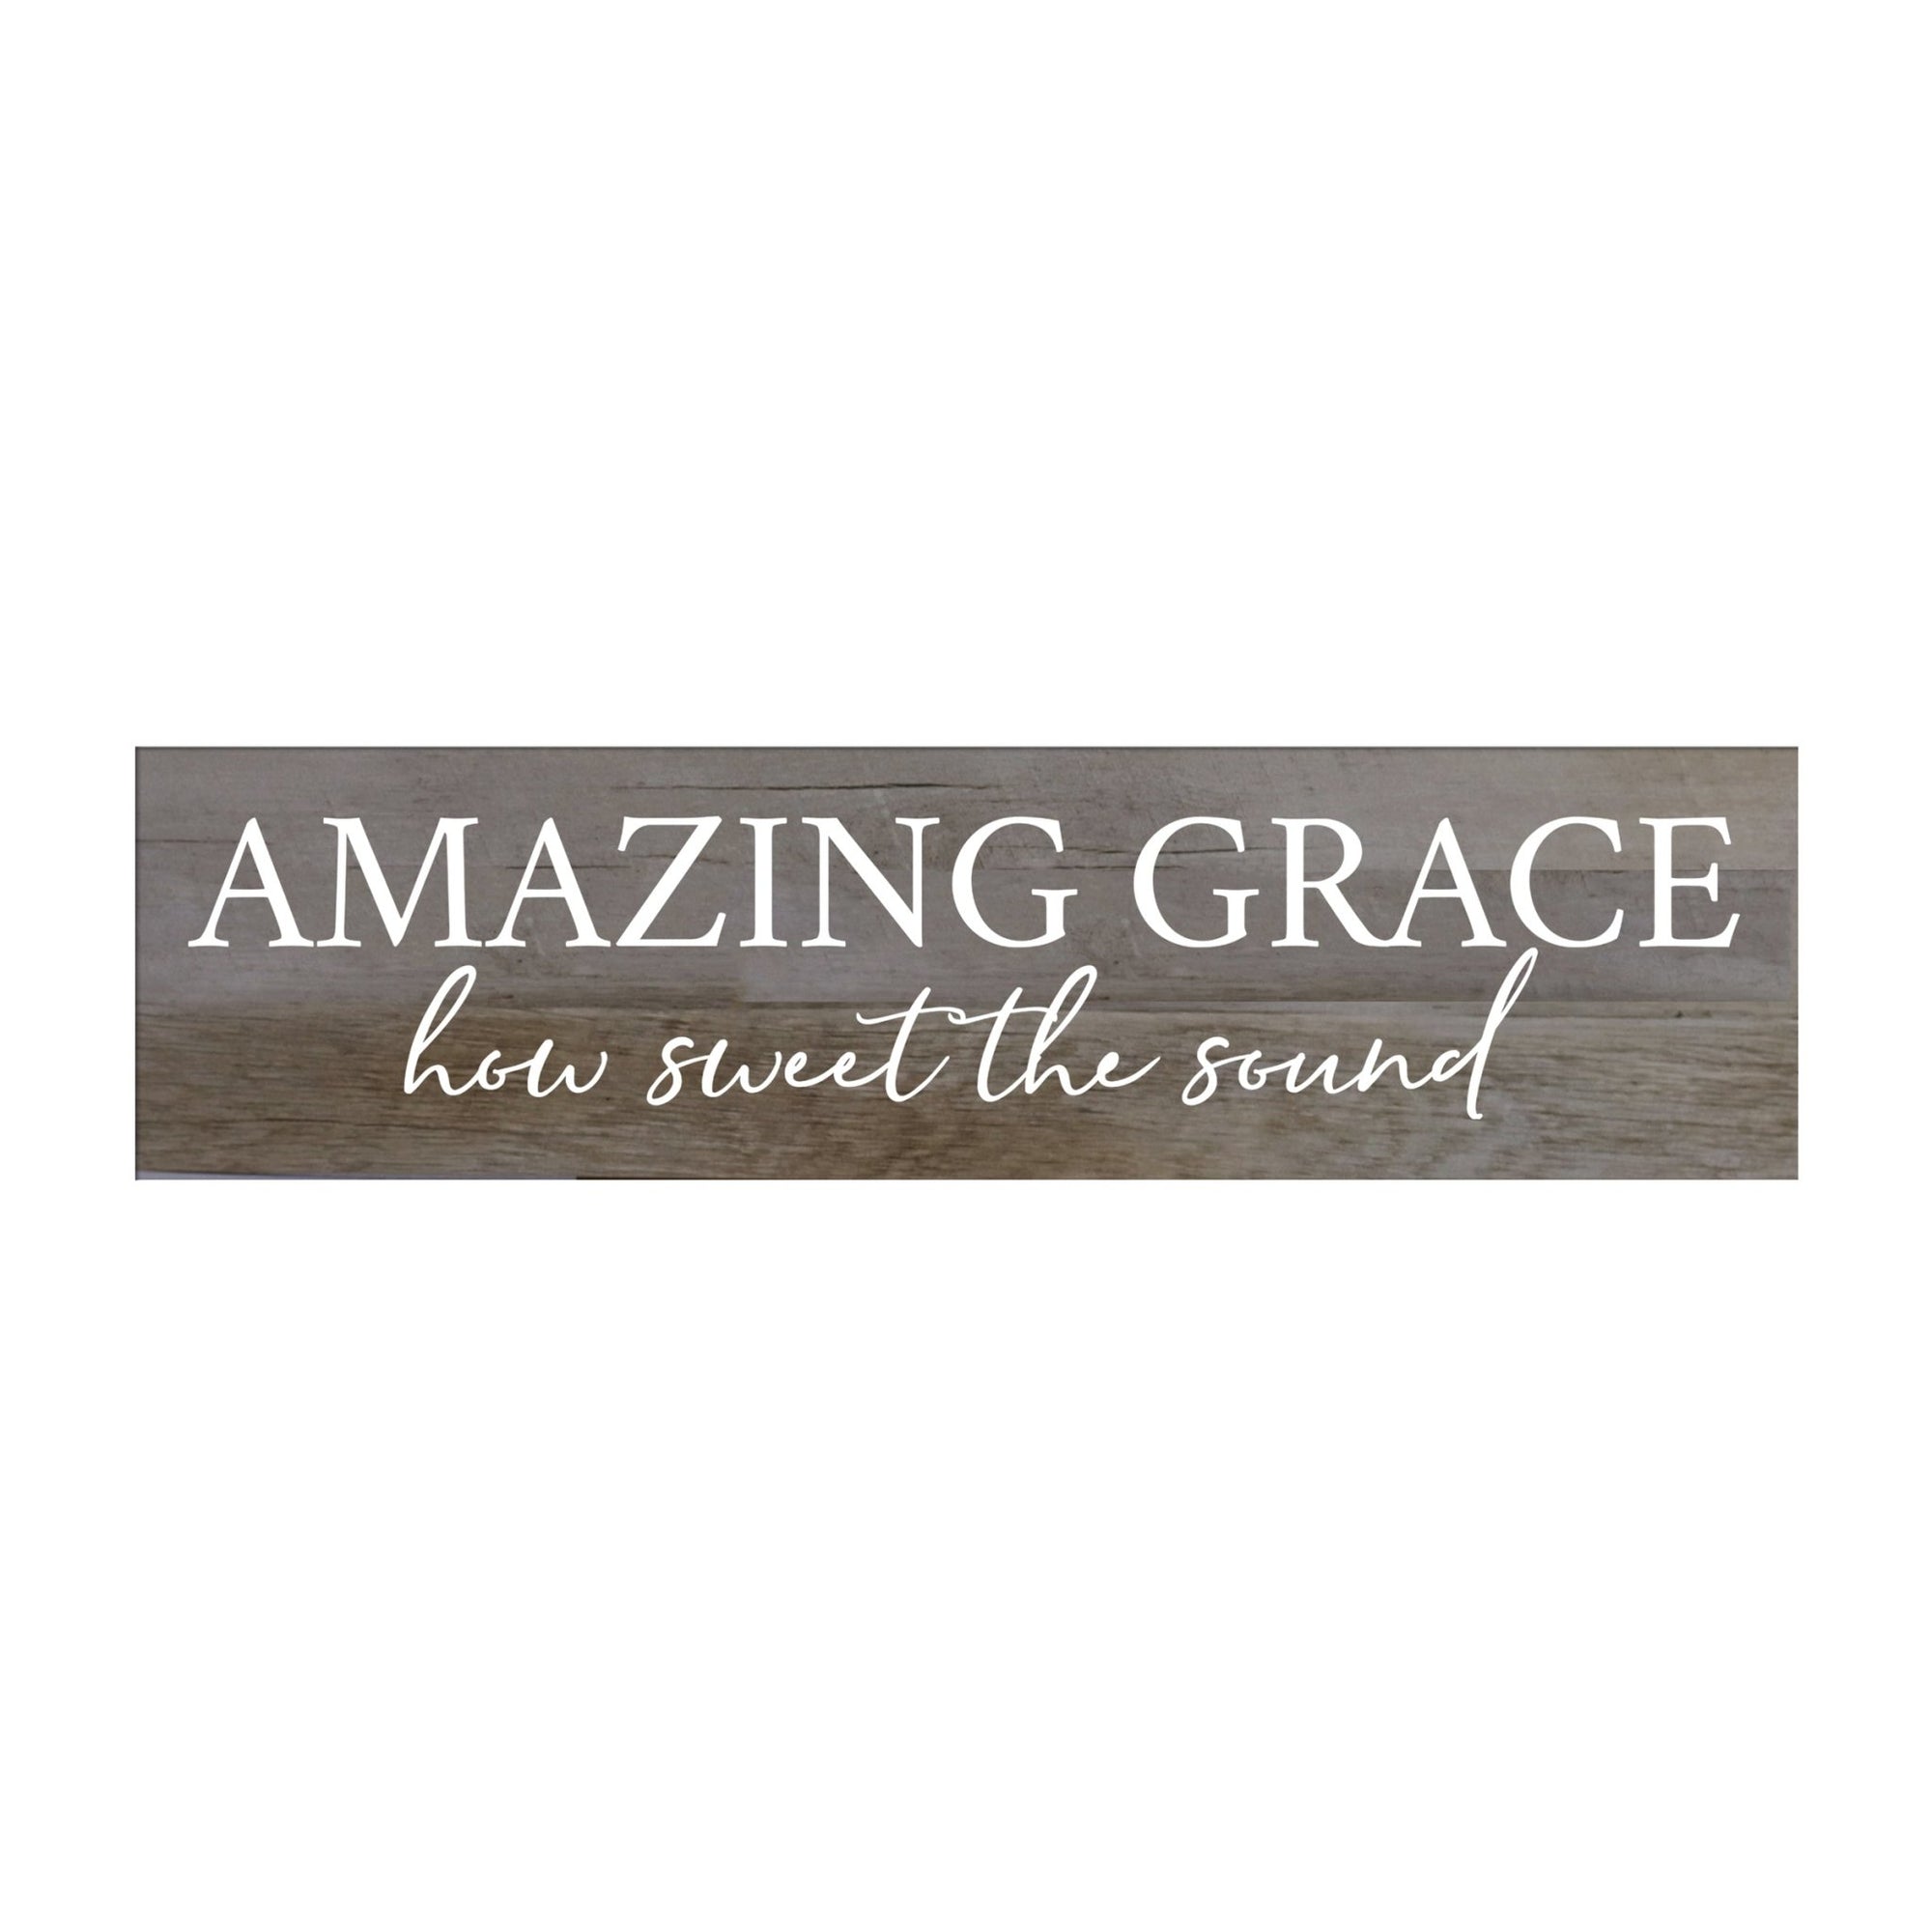 Inspirational Everyday Home and Family Wooden Wall Art Hanging Plaque 10 x 40 – Amazing Grace - LifeSong Milestones